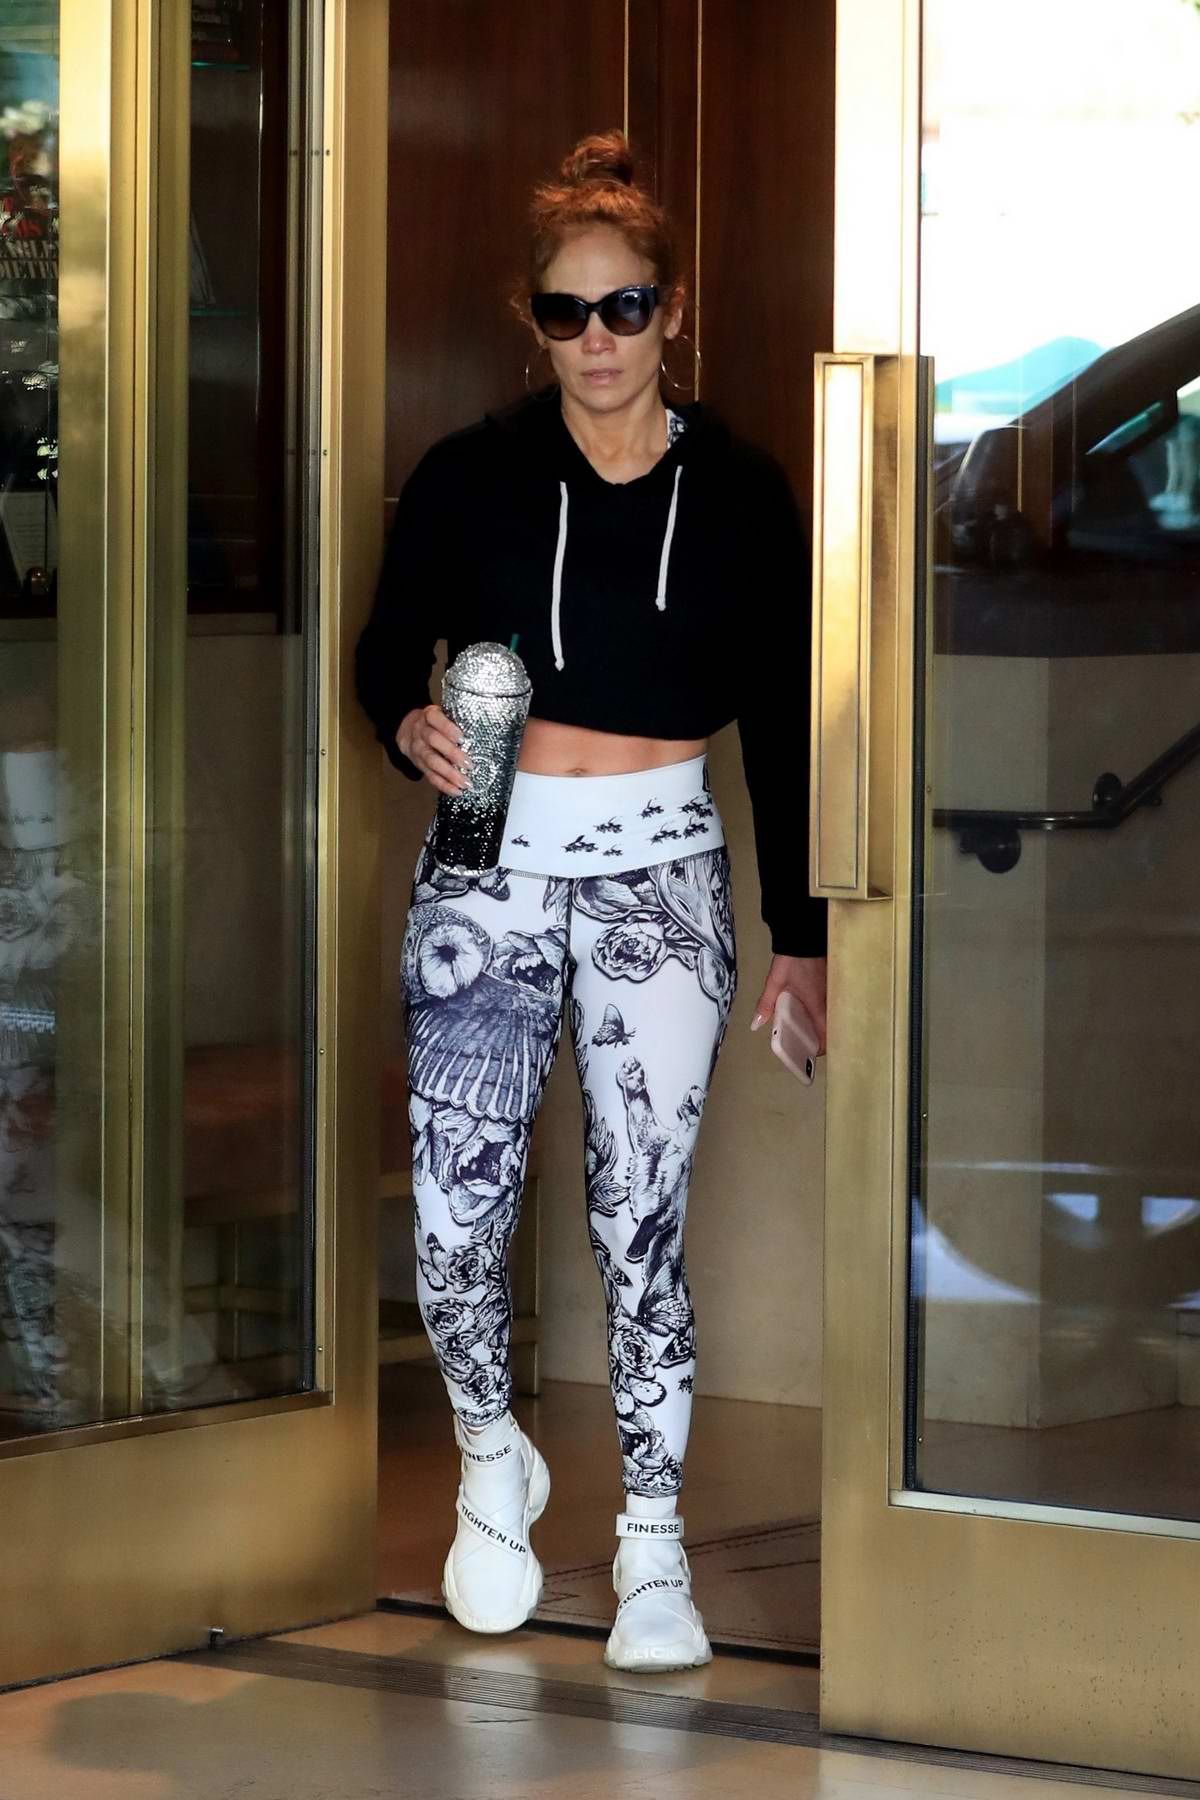 jennifer lopez sports cropped hoodie and leggings as she leaves the gym ...